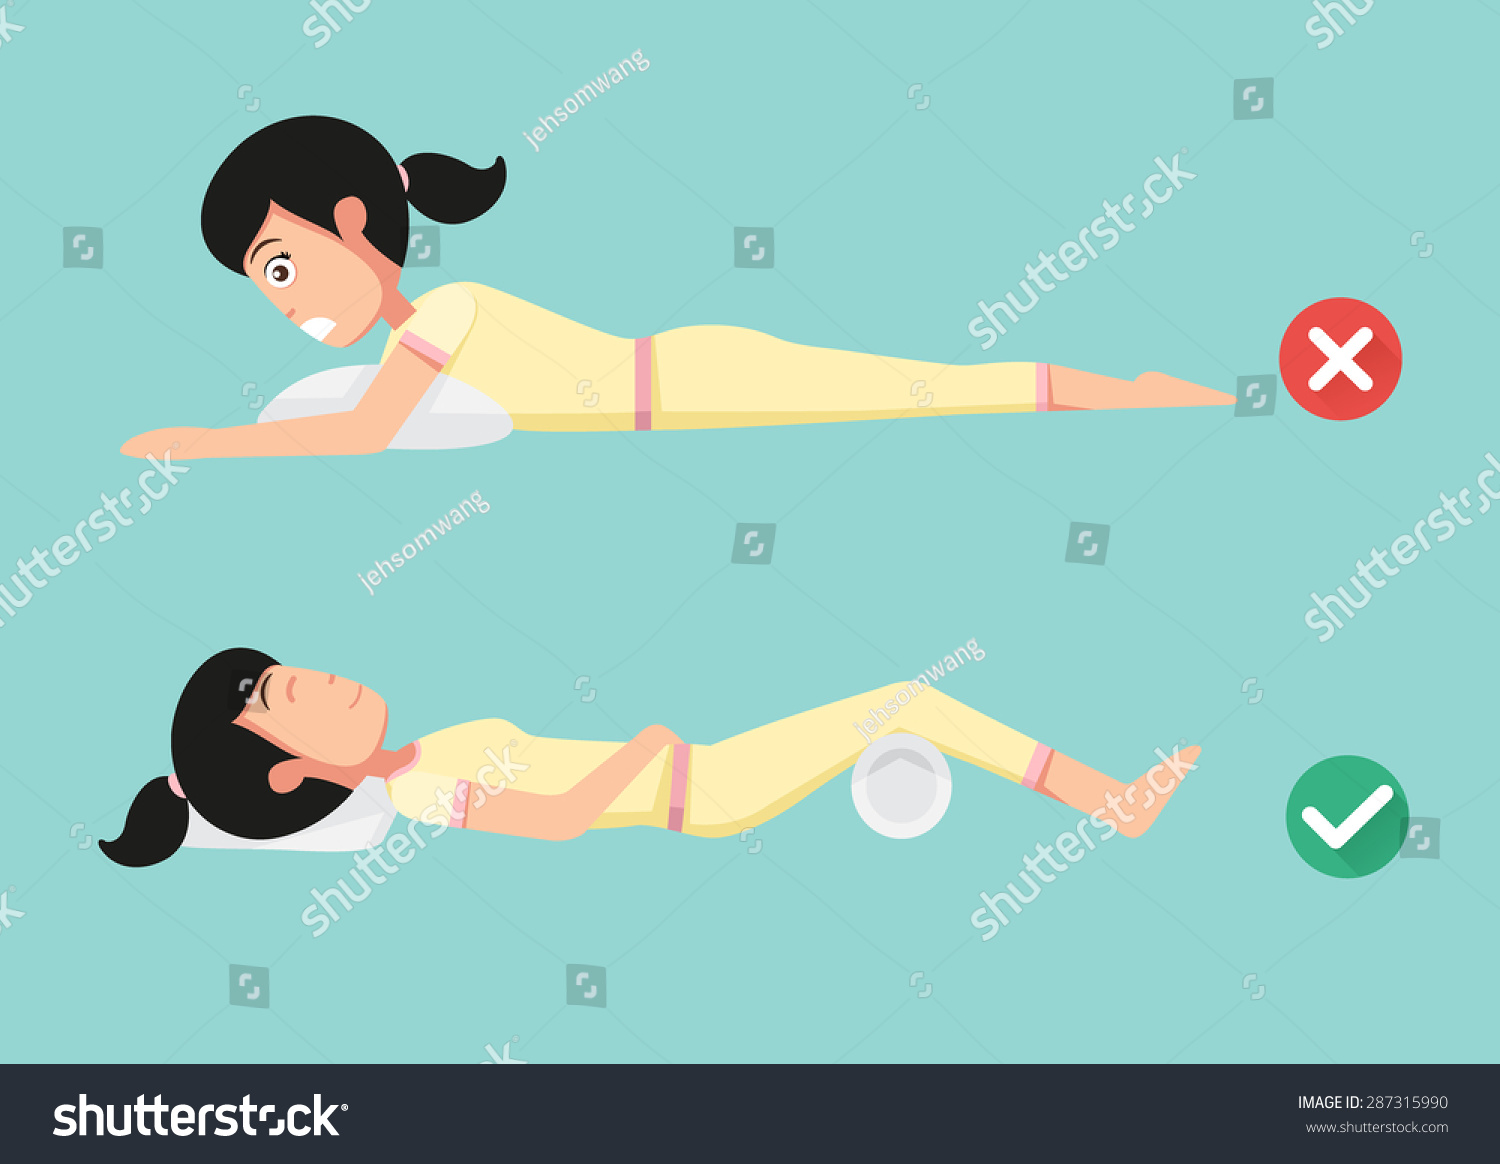 SVG of Best and worst positions for sleeping, illustration, vector svg